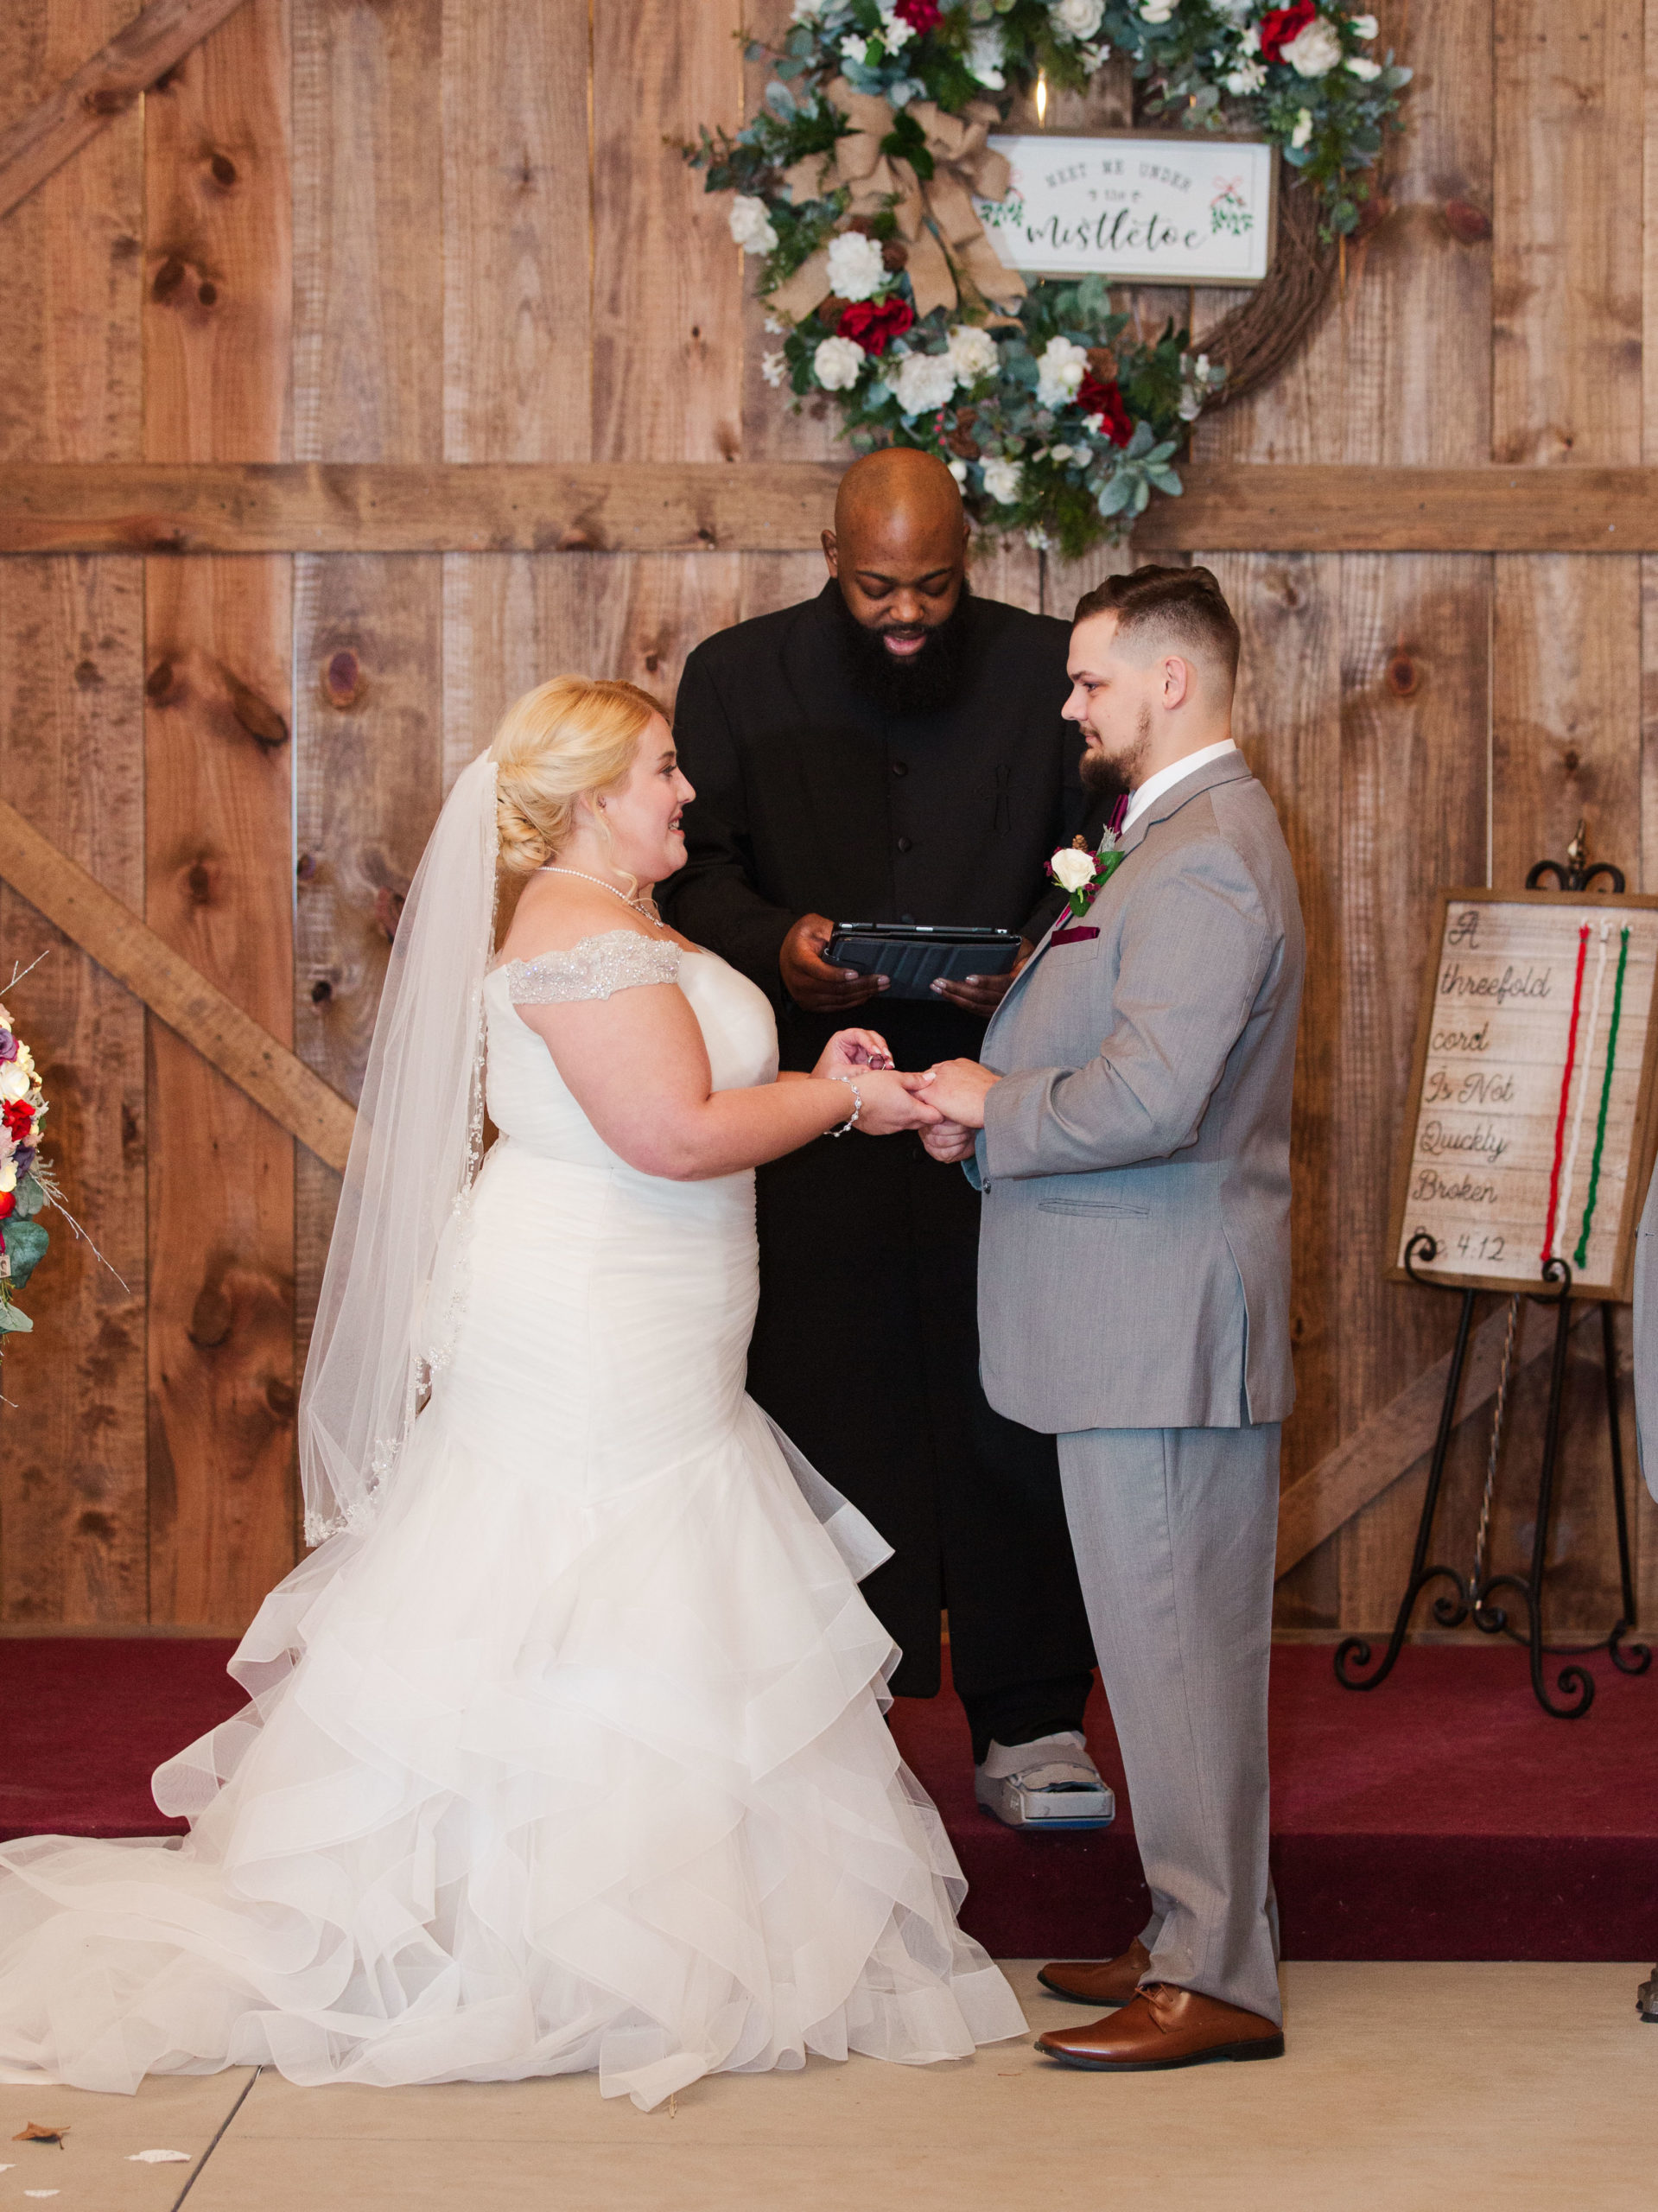 ceremony- exchanging rings - Wright Memorial Event Center